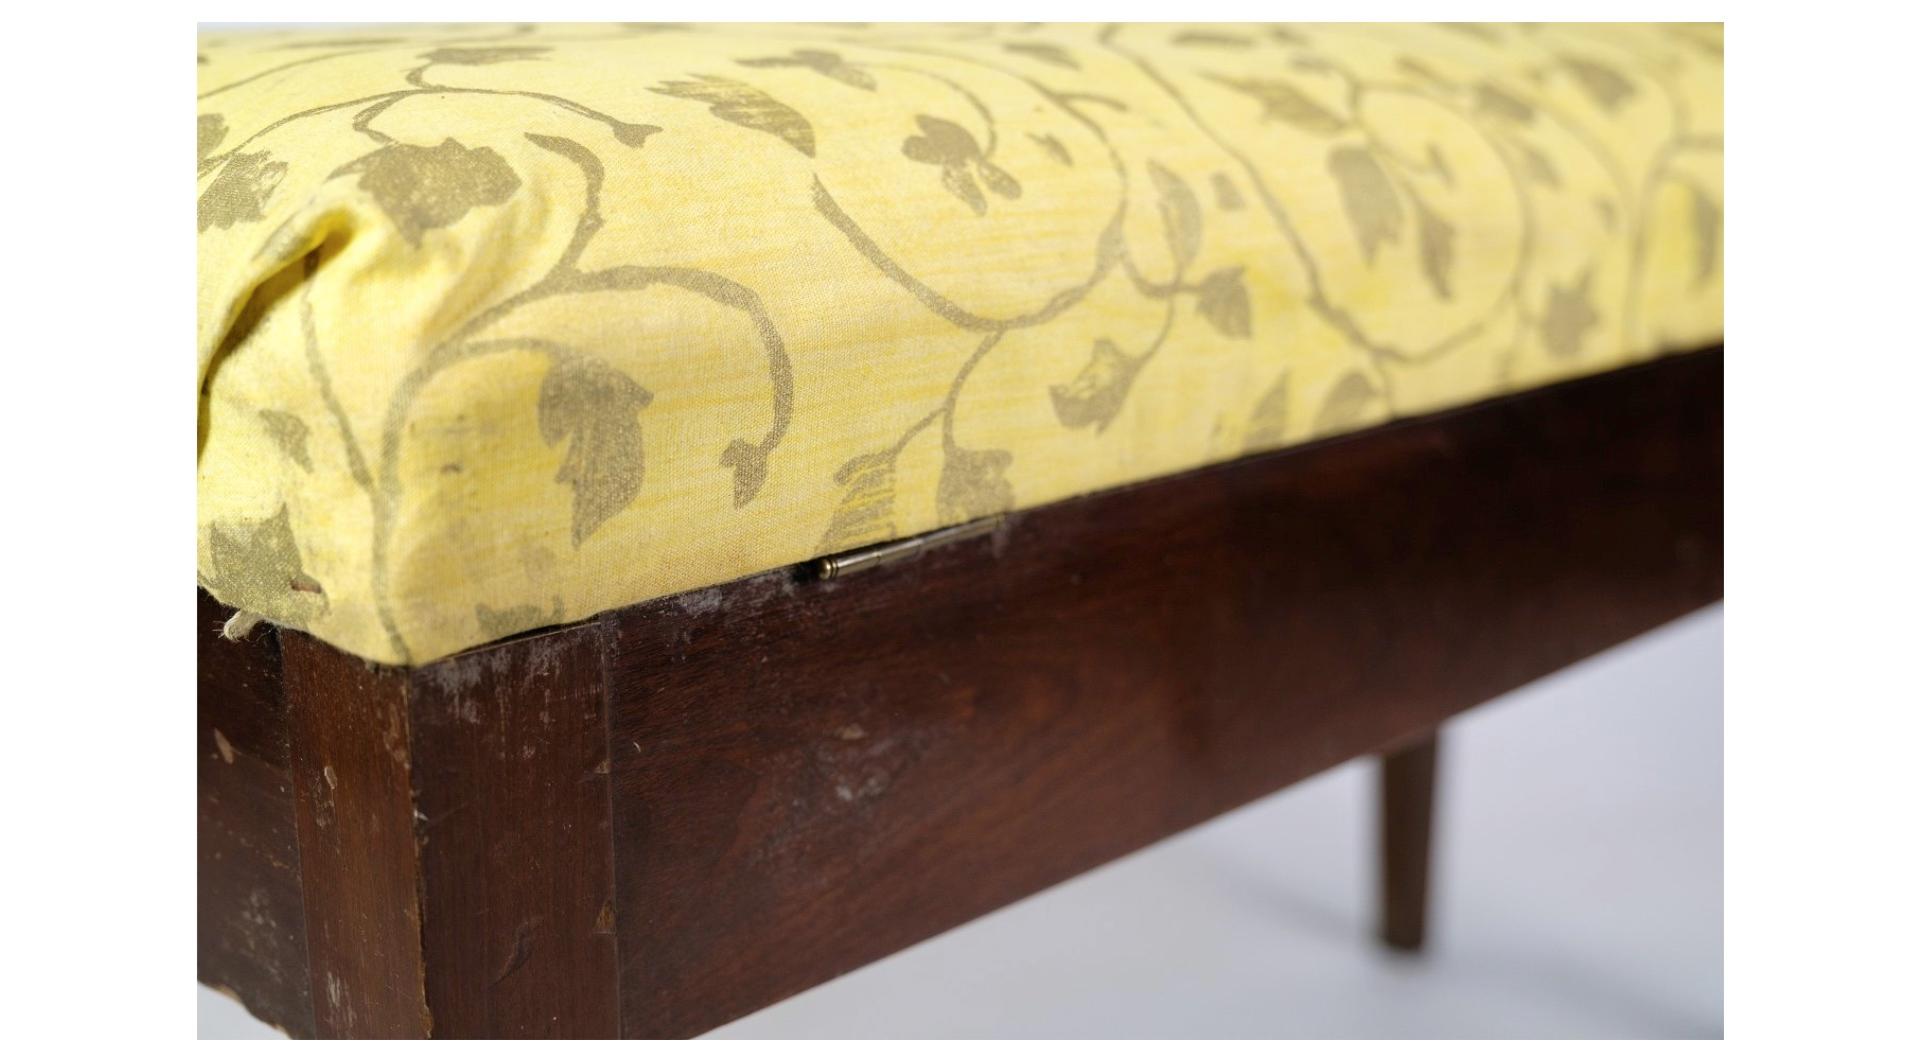 Early 20th Century Piano Bench / Stool in Mahogany with Light Floral Fabric from Around 1910 For Sale